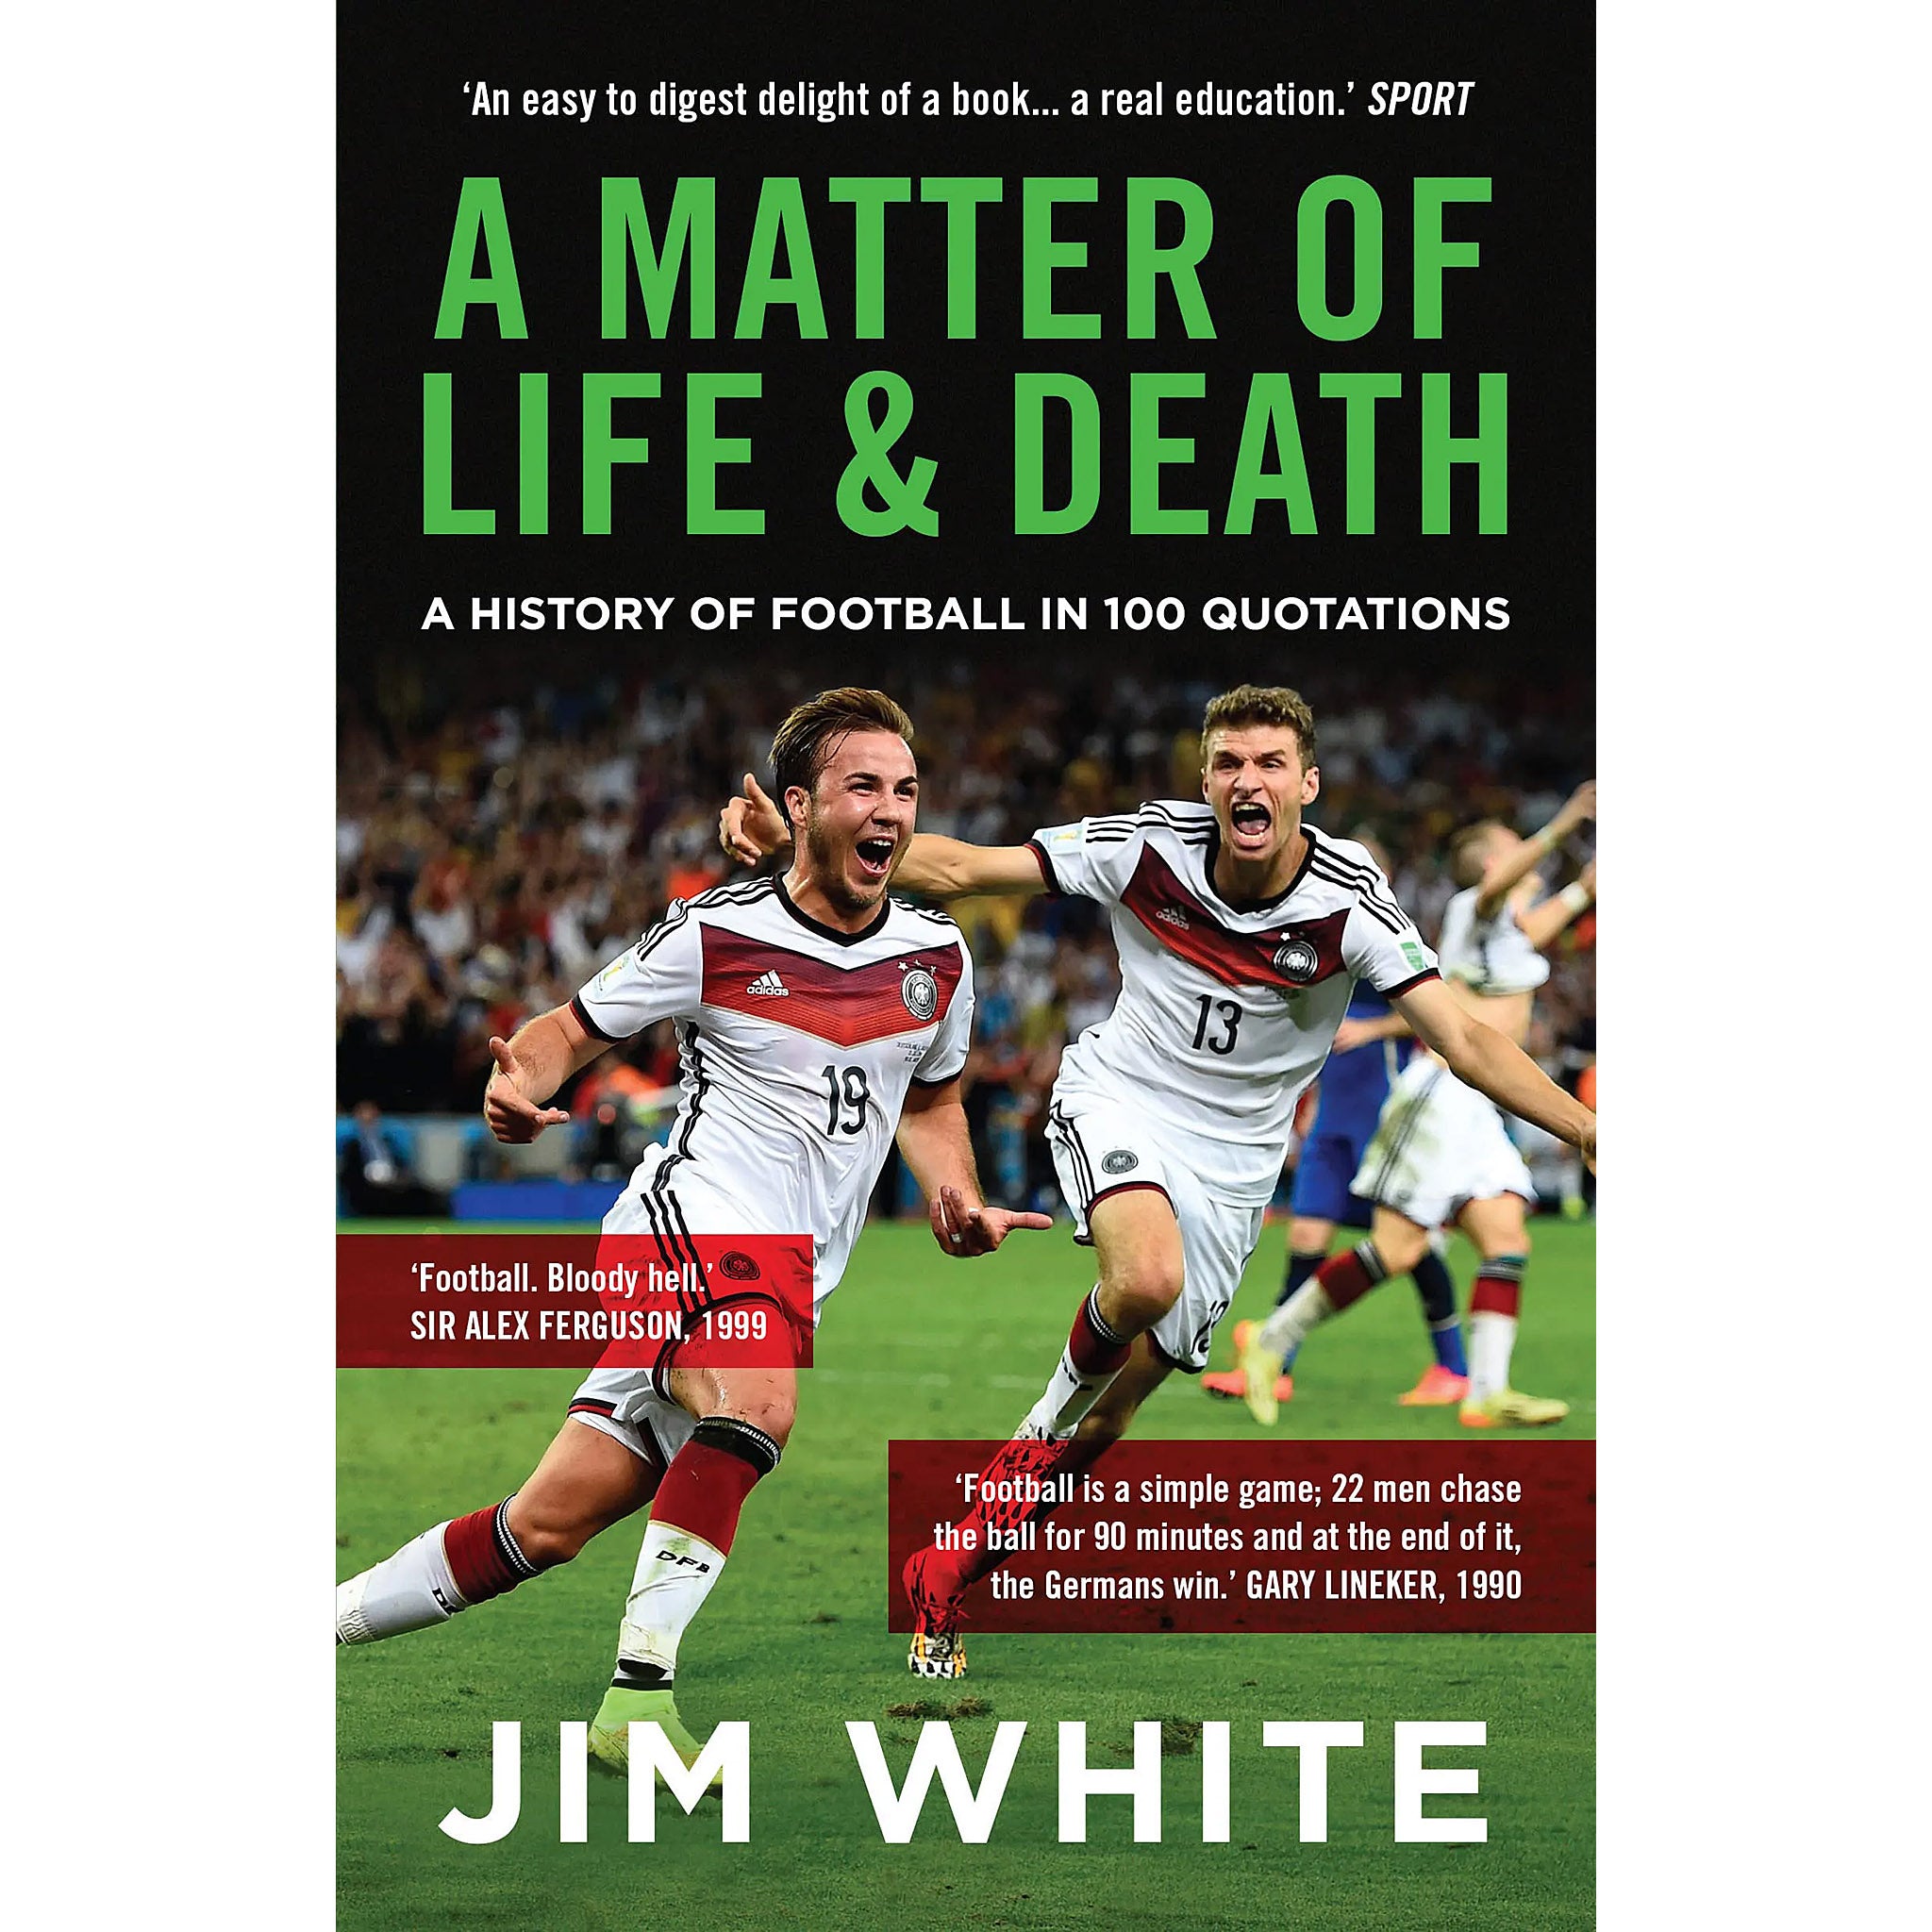 A Matter of Life & Death – A History of Football in 100 Quotations